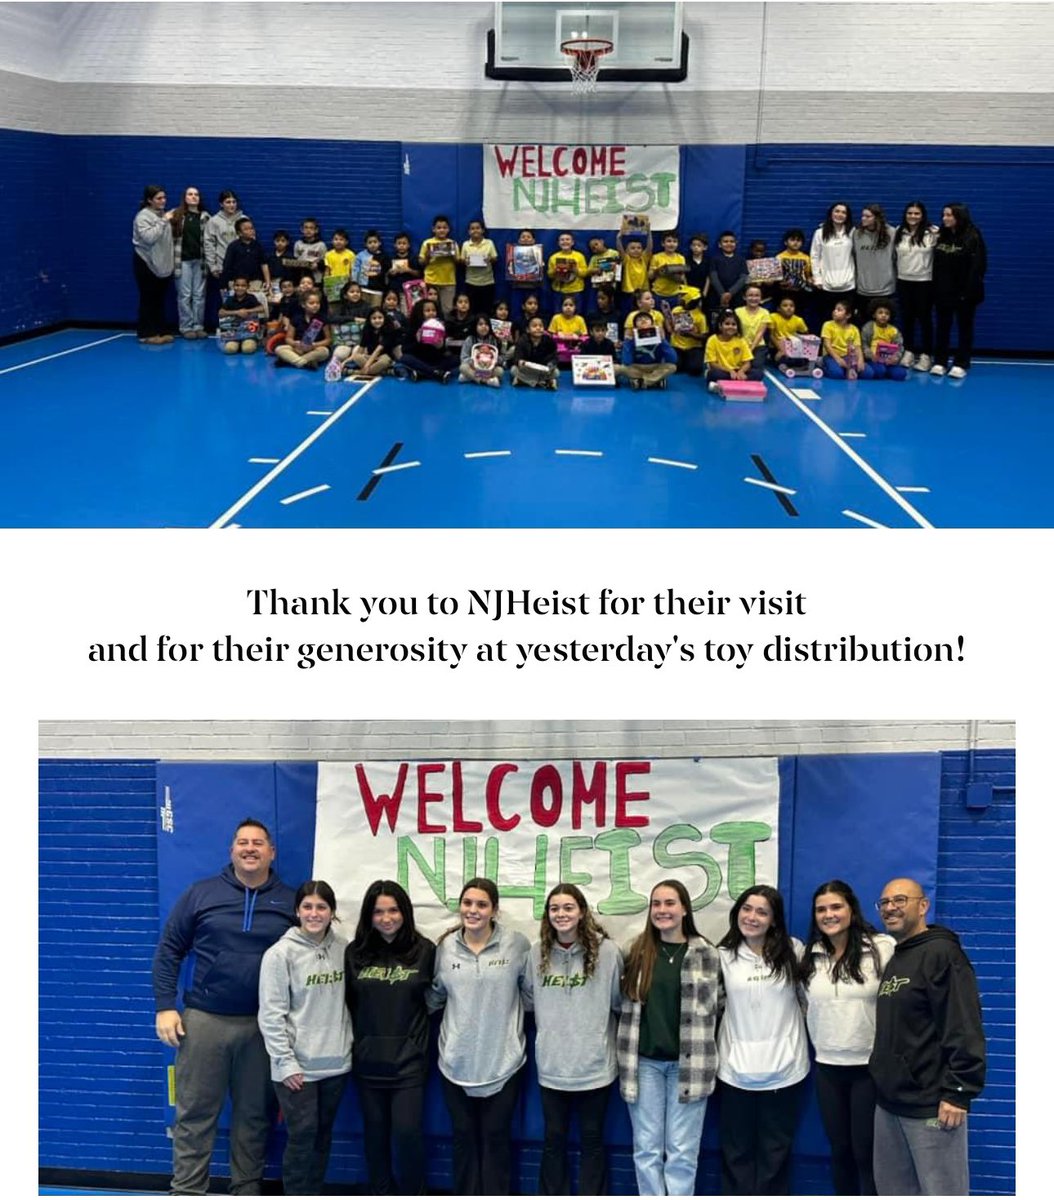 Thank you to NJHeist for their visit and for their generosity at yesterday's toy distribution!